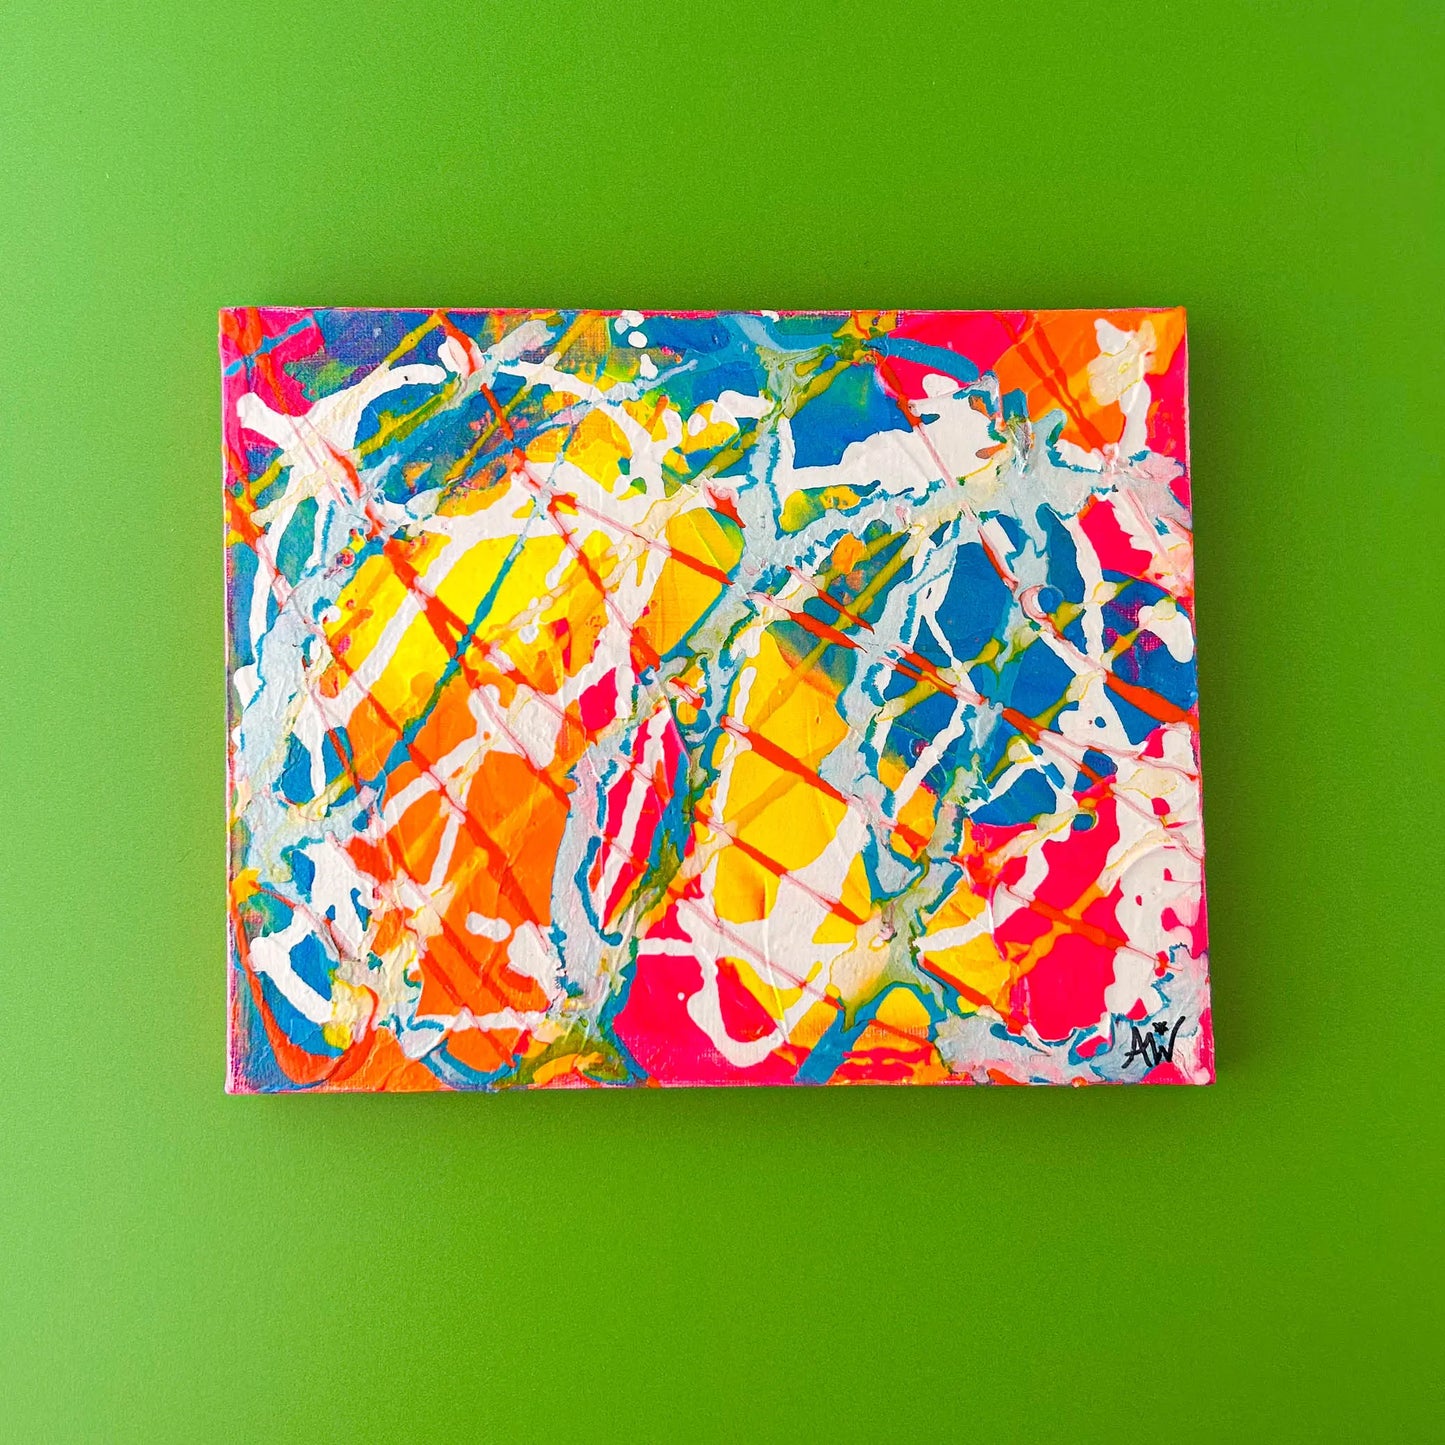 Neon Commotion 8x10 Abstract Painting